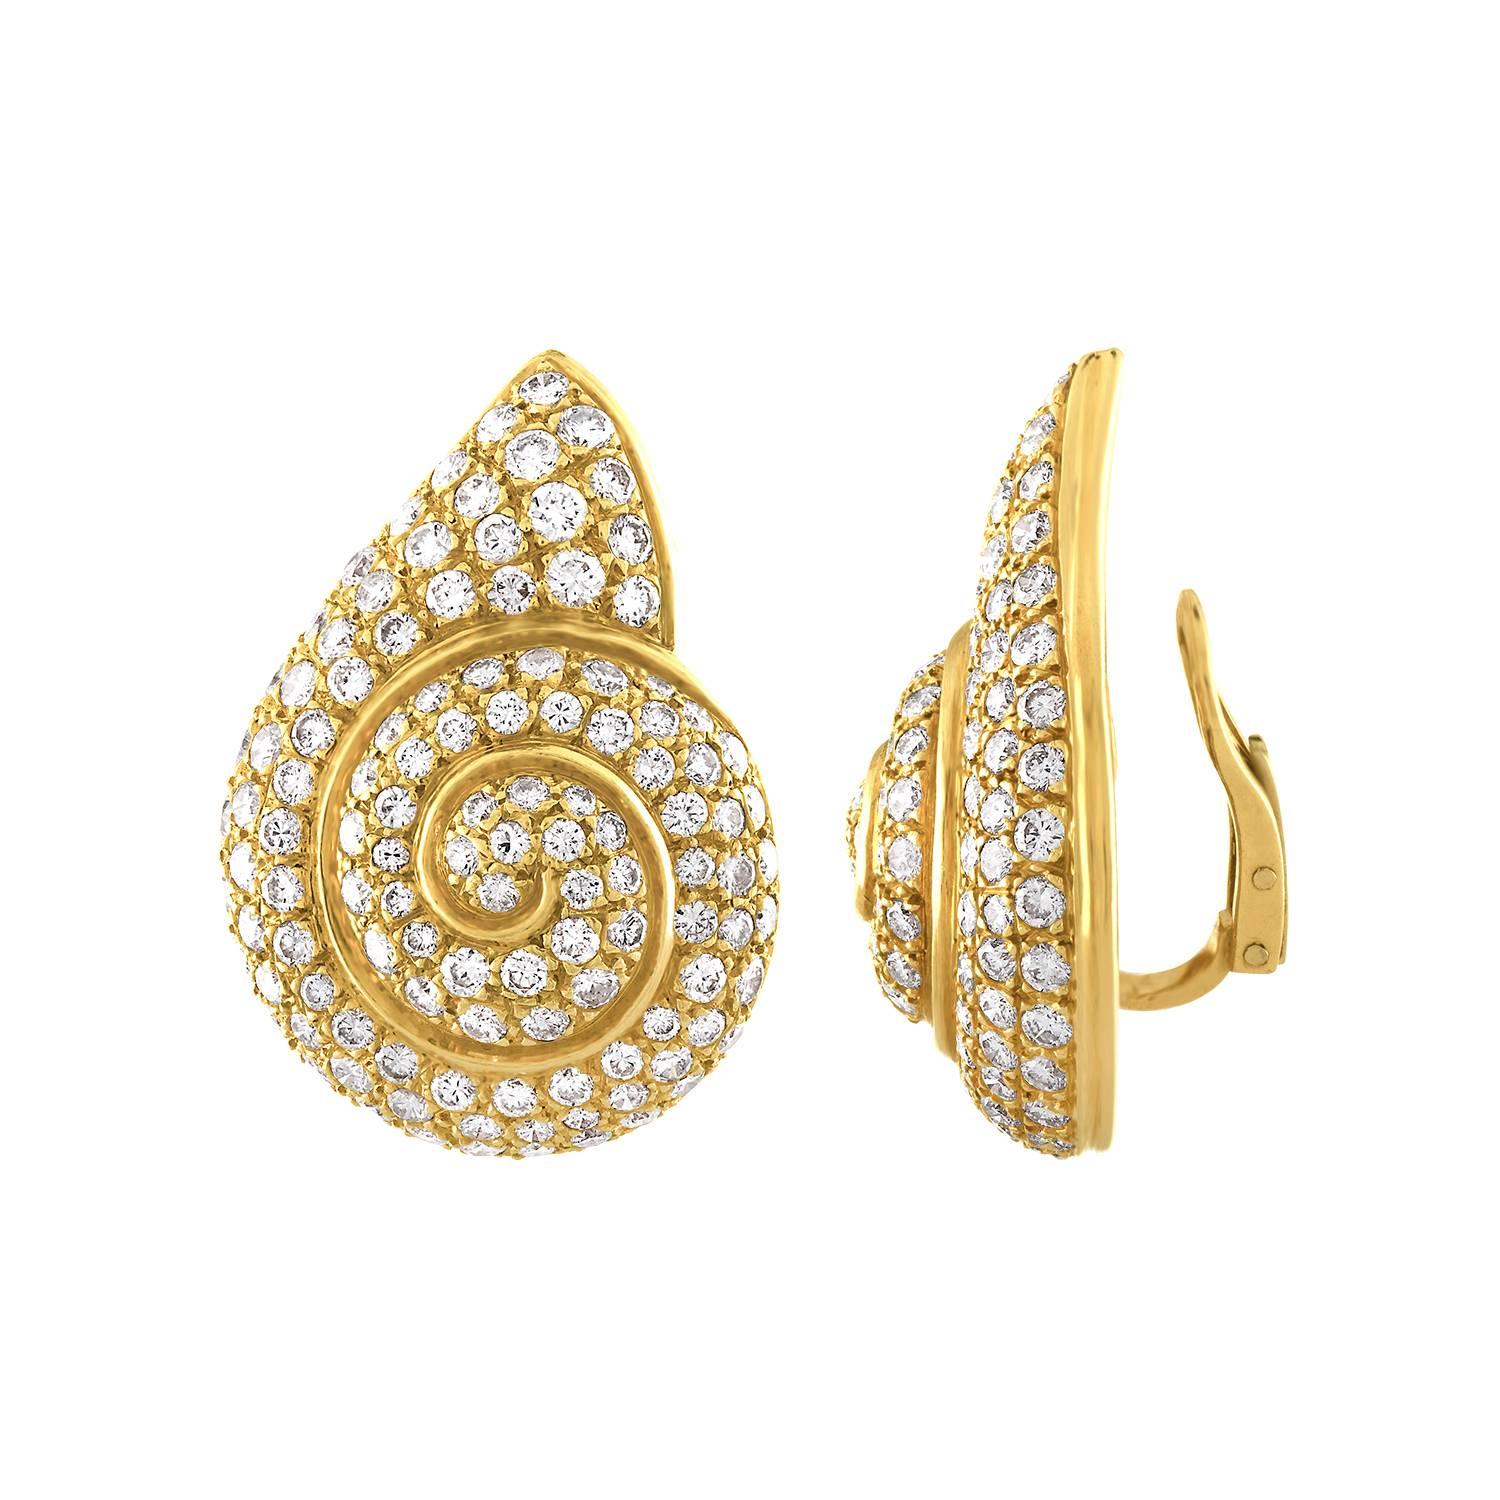 Stunning Clip-On Earrings
The earrings are 18K Yellow Gold.
There are 10.00 Carats in Diamonds G VS/SI
The earrings are shaped like snails.
The earrings are clip-on.
The earrings are made in England, with English hallmarks and makers marks.
The